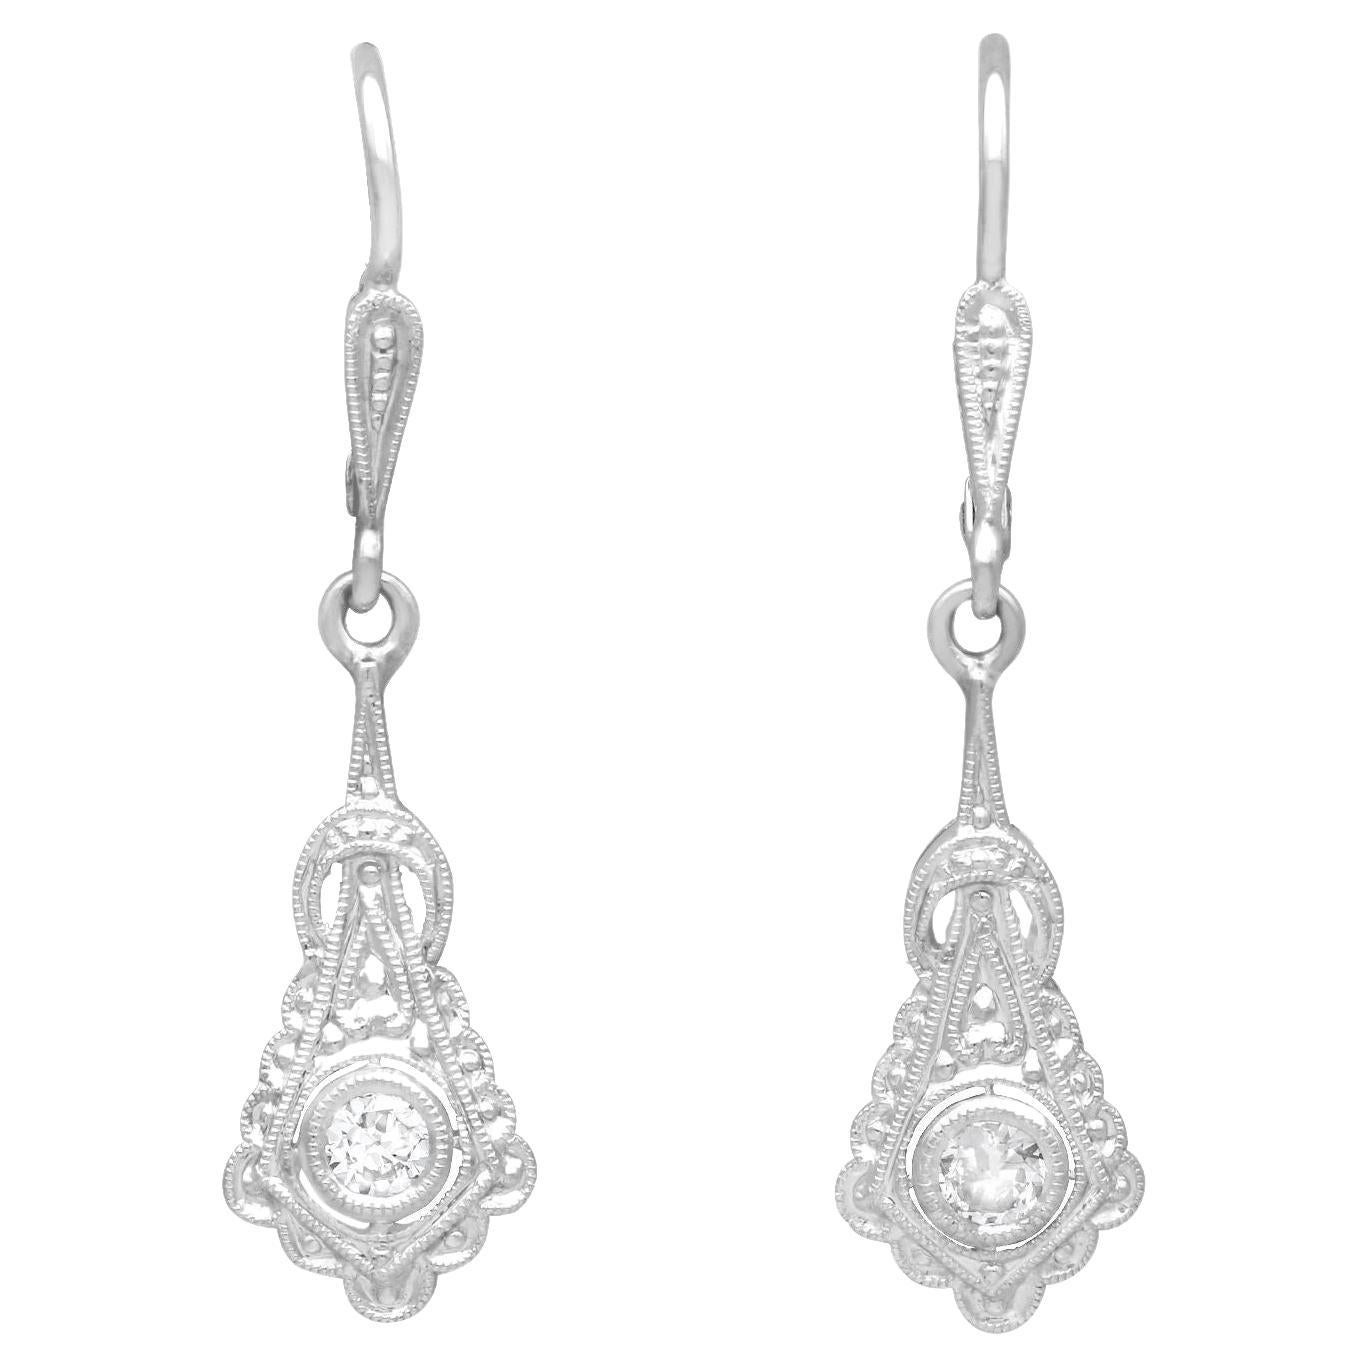 Antique Art Deco 0.24ct Diamond and 14ct White Gold Drop Earrings